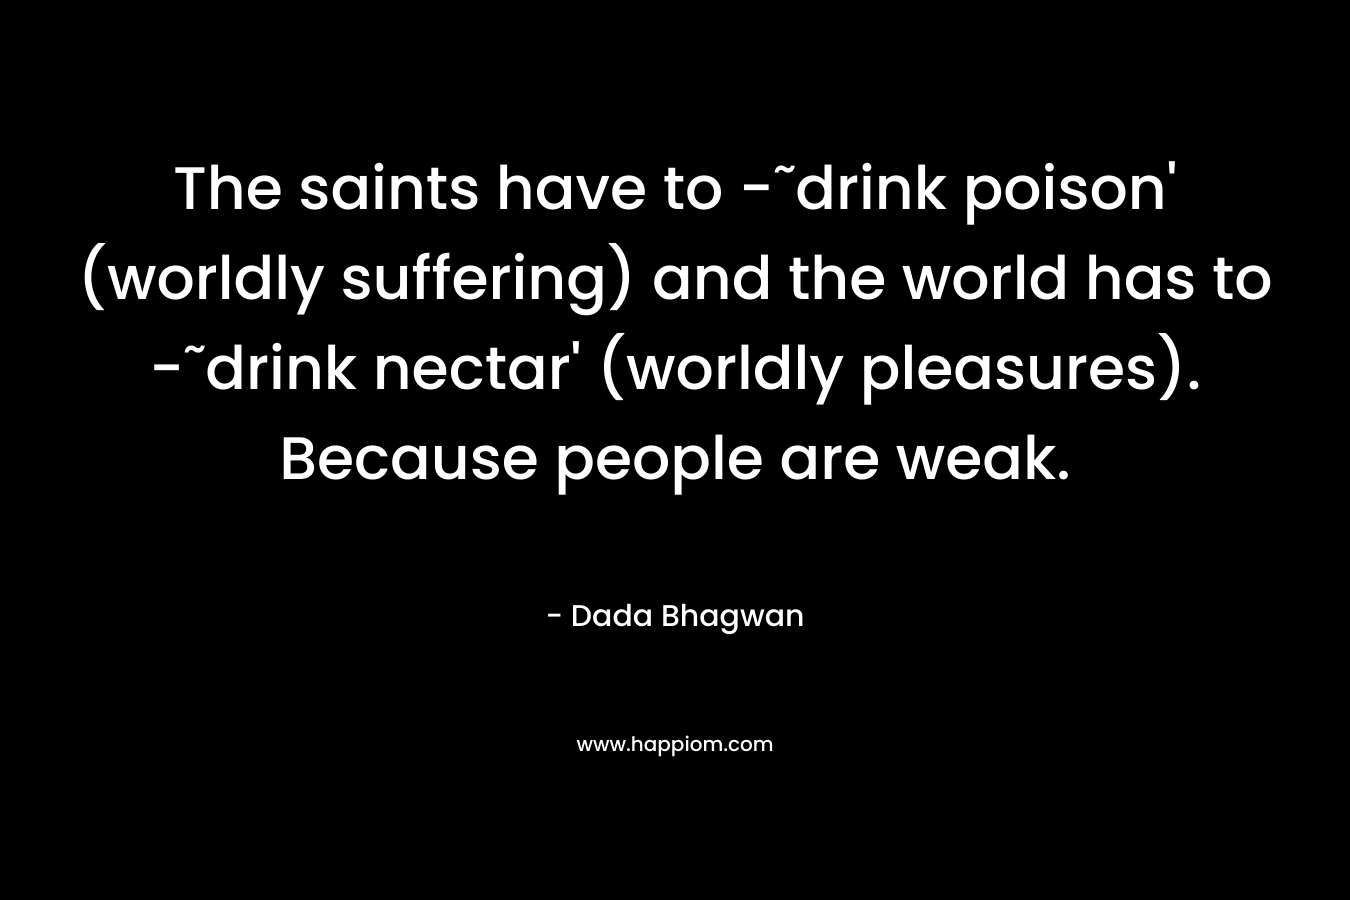 The saints have to -˜drink poison' (worldly suffering) and the world has to -˜drink nectar' (worldly pleasures). Because people are weak.